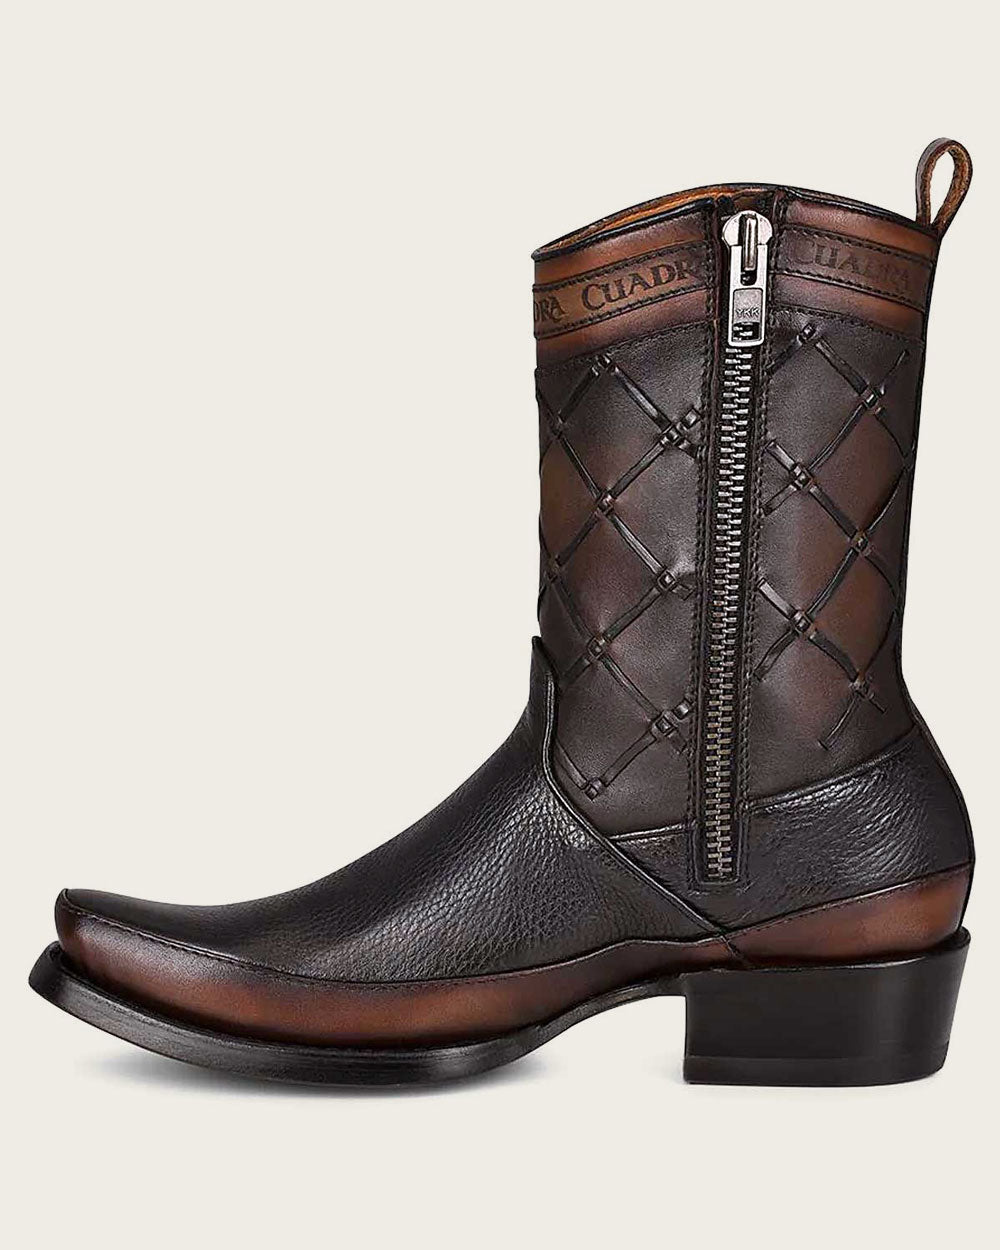 Hand-Painted Leather Finish: Cuadra boots boast a polished, hand-painted finish for a stand-out look.